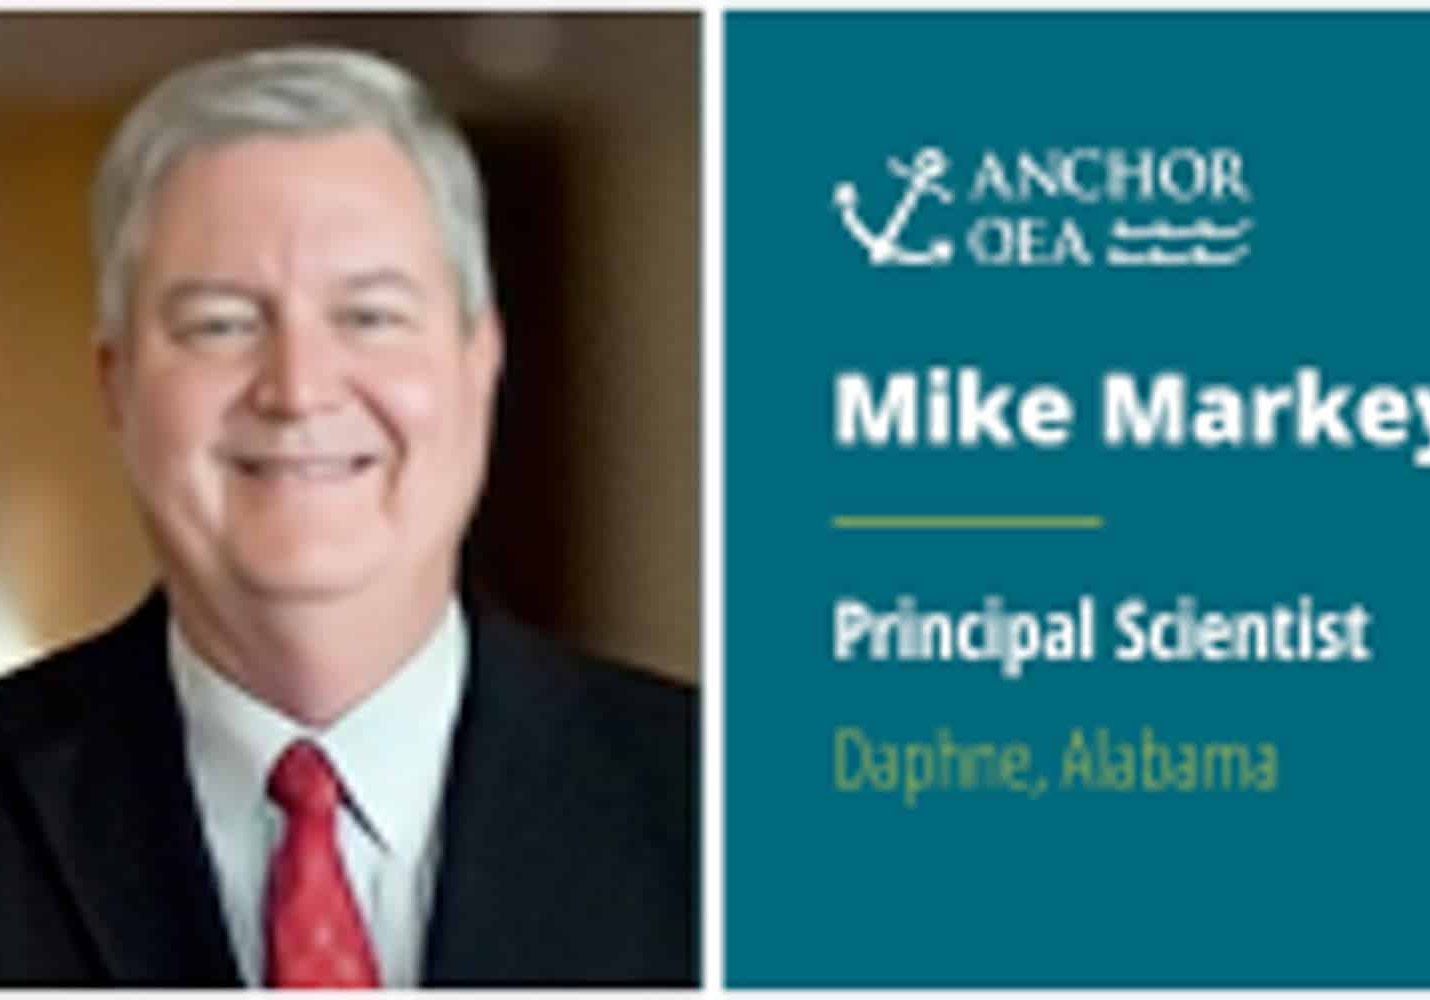 Markey Joins Anchor QEA In Daphne